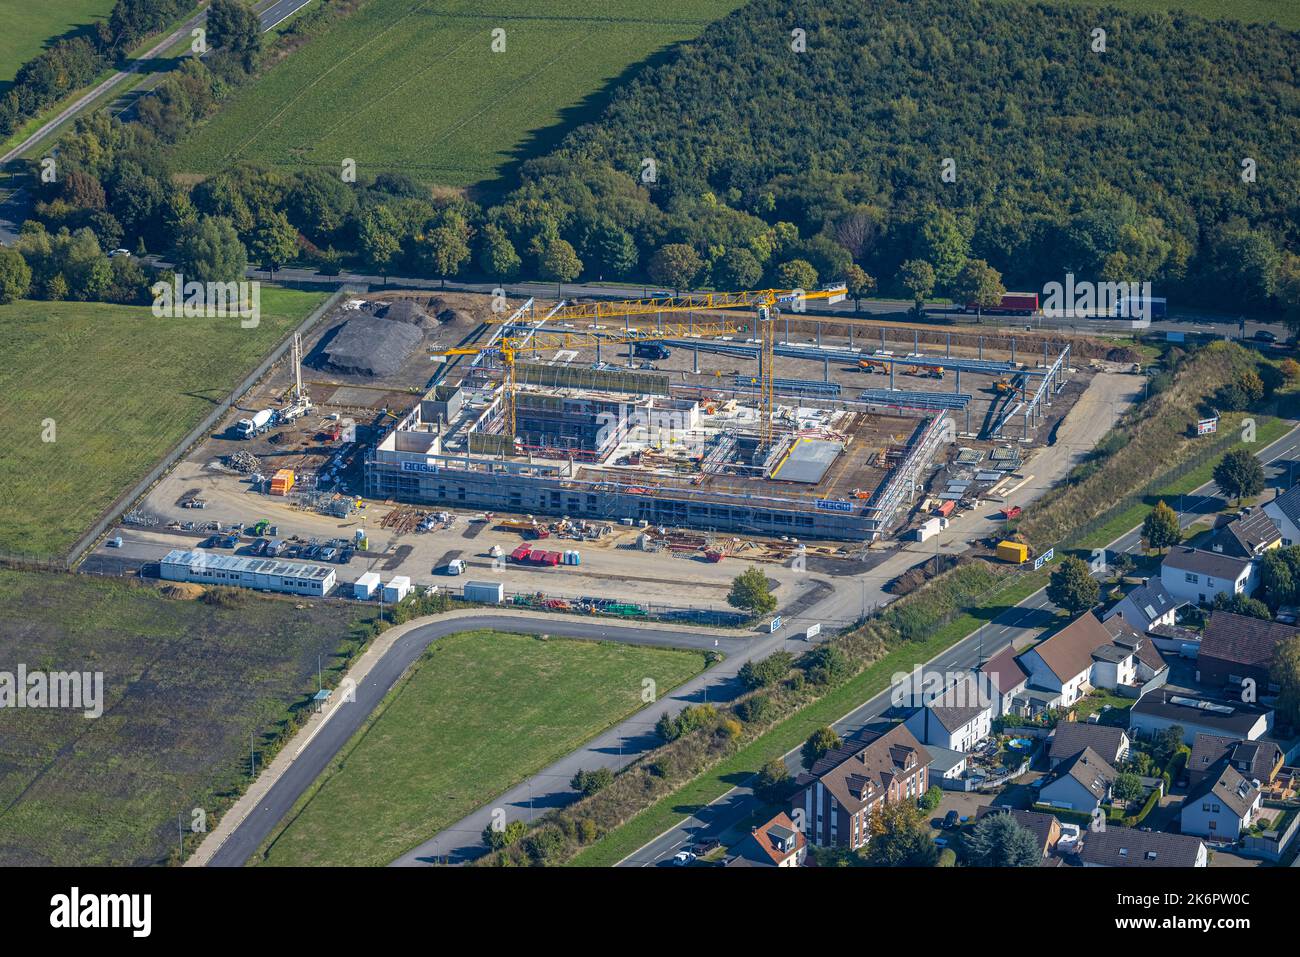 Aerial view, construction site for a new police building, Flughafenring corner Zeche-Norm-Straße, former parking lot P3, Dortmund Airport, Wickede, Do Stock Photo